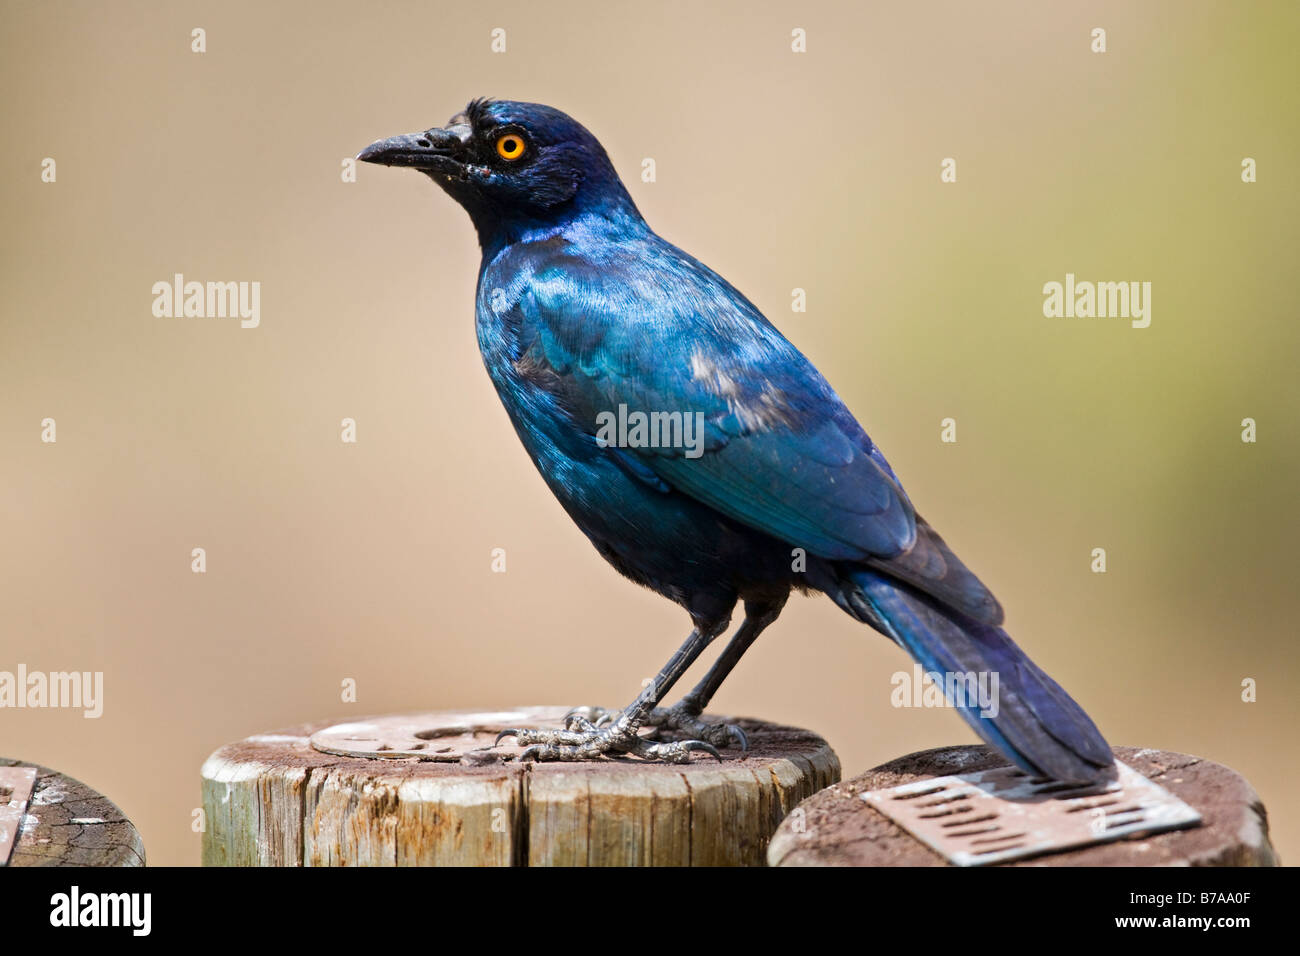 Red-shouldered Glossy-starling (Lamprotornis nitens), South Africa Stock Photo